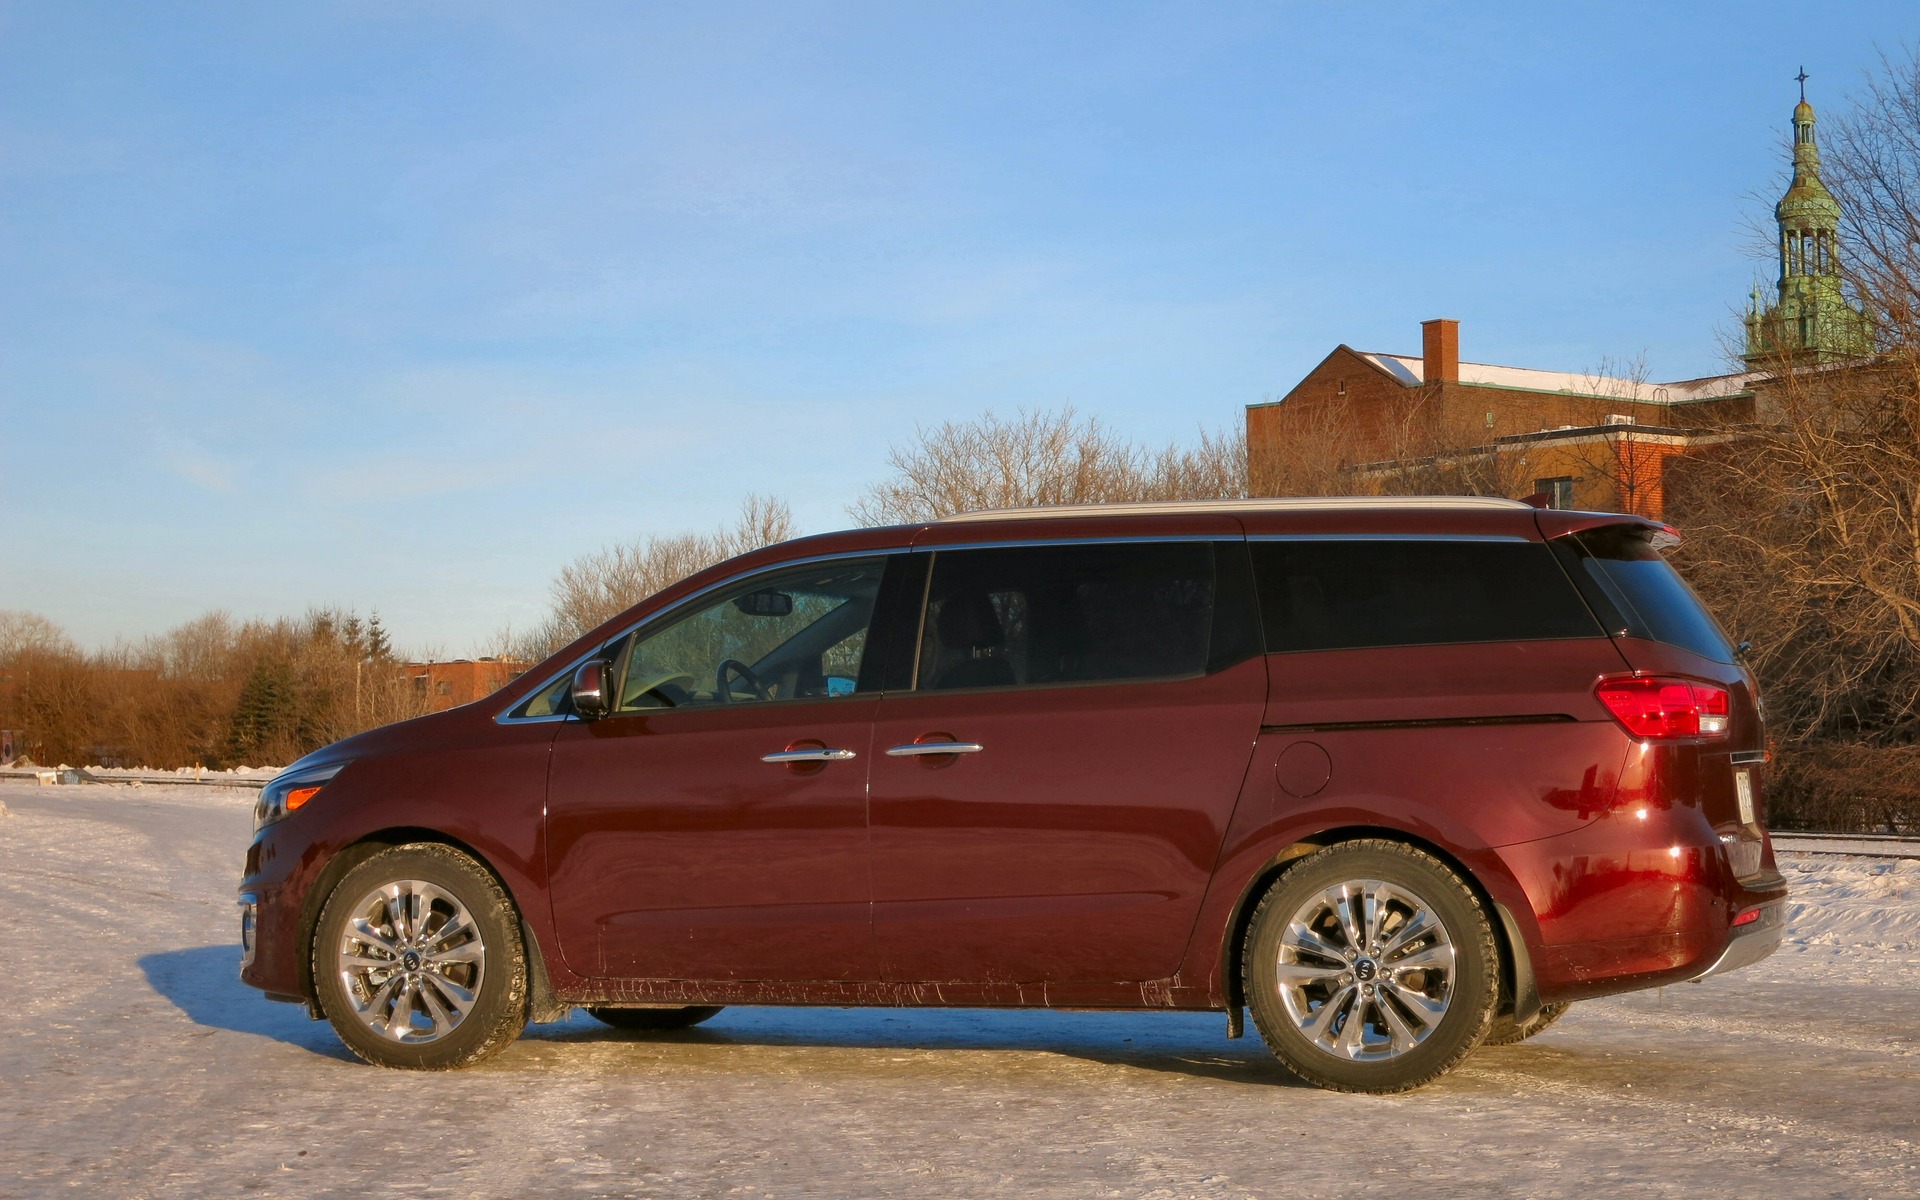 The SXL+ model sits at the very top of the minivan's family tree.